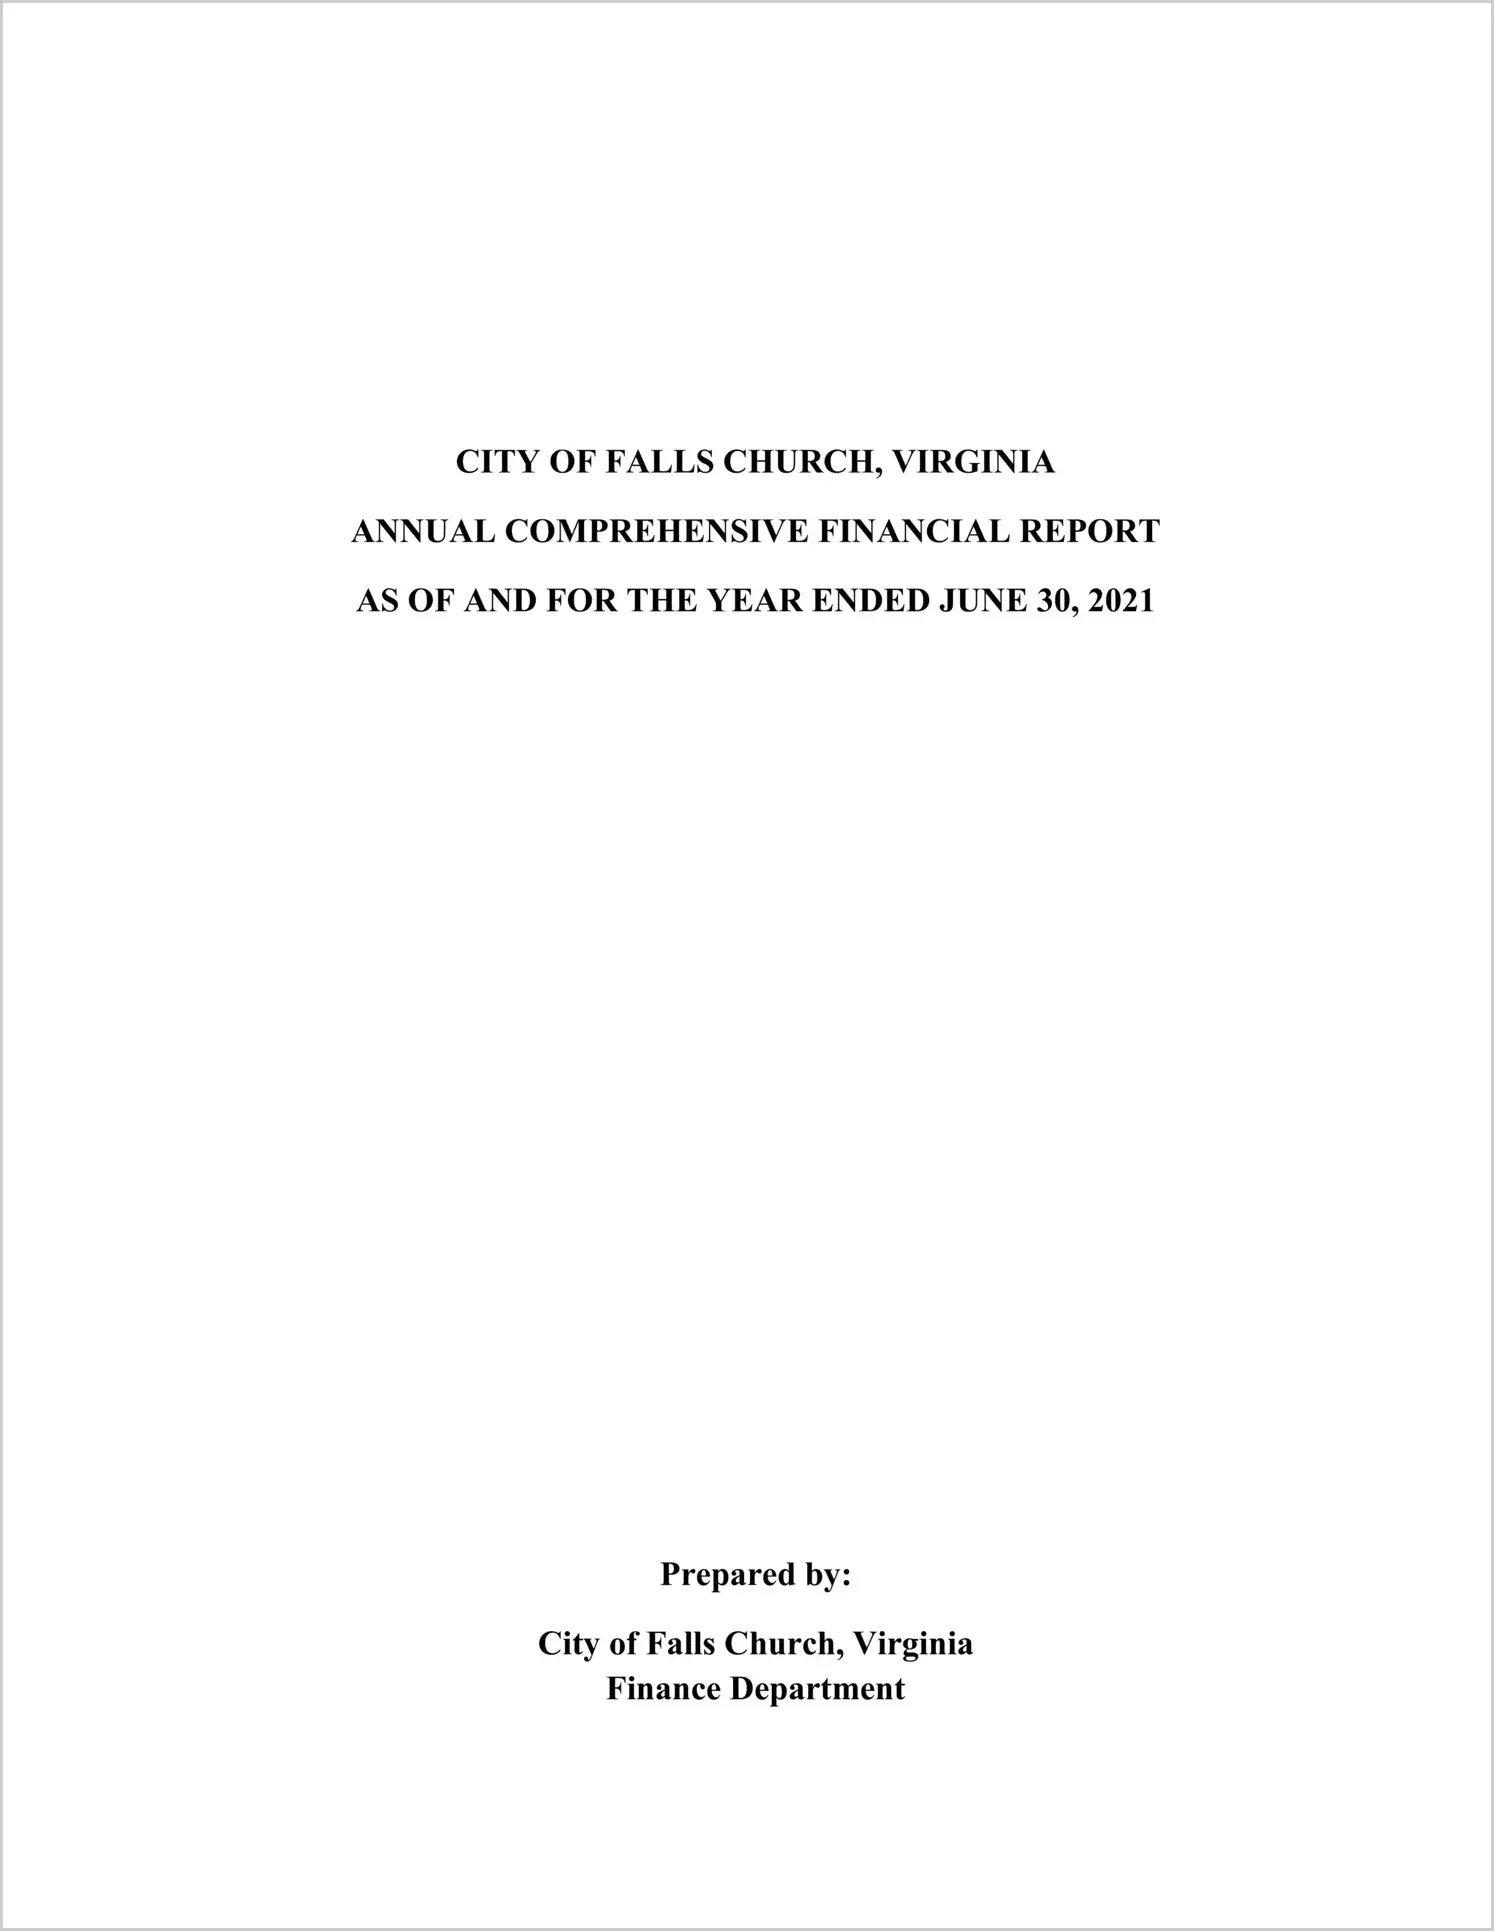 2021 Annual Financial Report for City of Falls Church